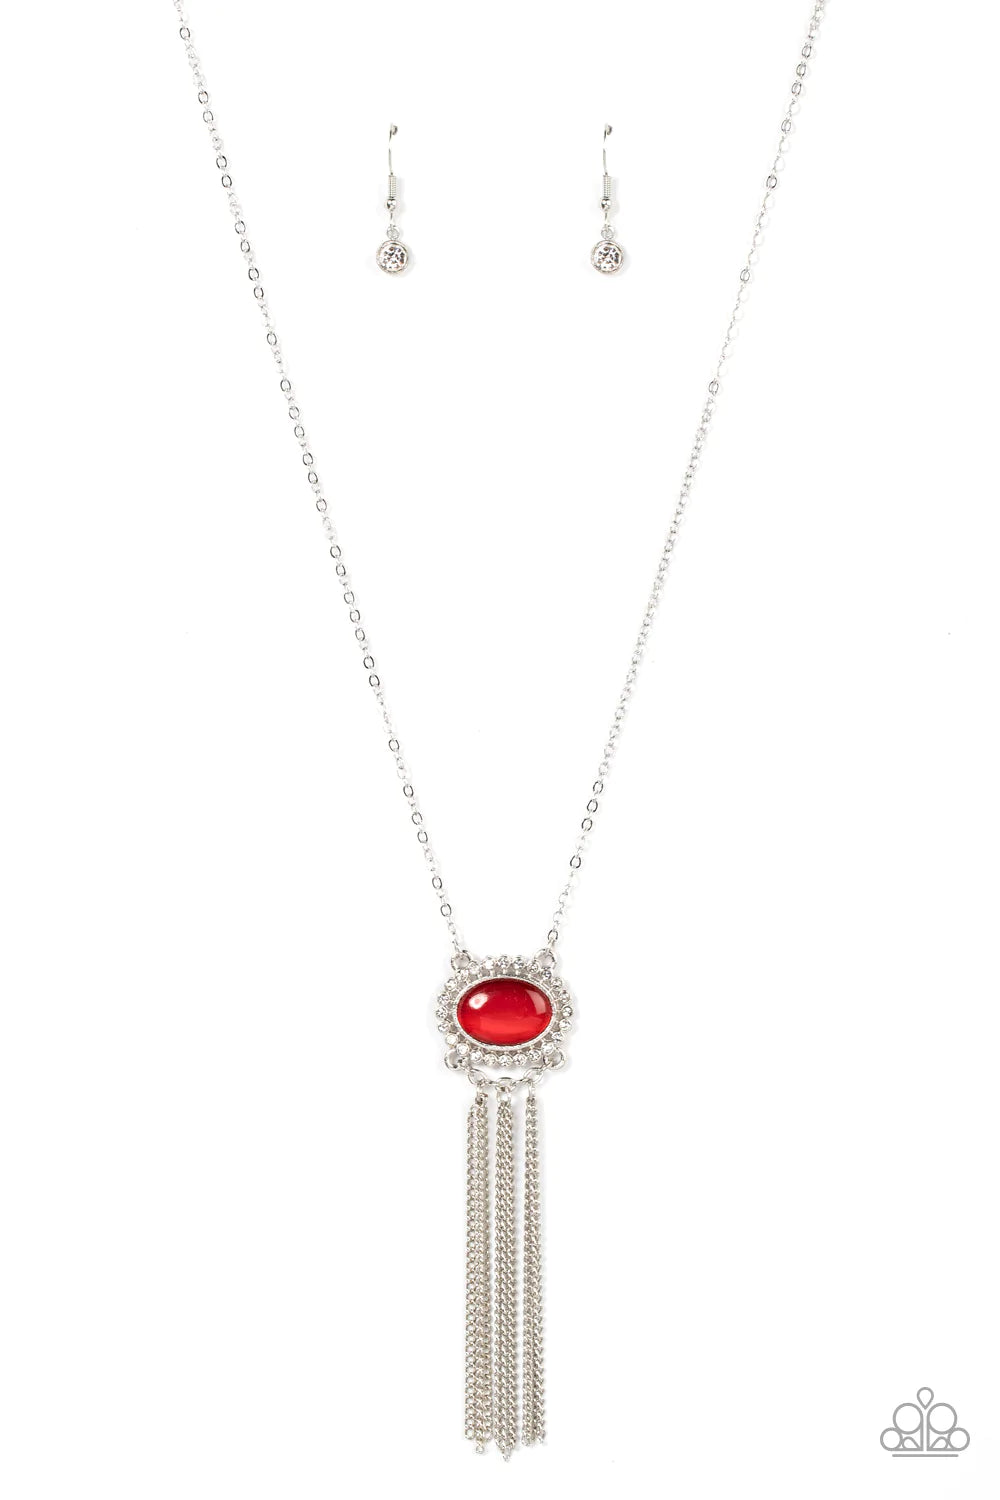 Paparazzi Accessories Happily Ever Ethereal - Red Attached to silver prongs, glassy white rhinestones radiate out from a red cat's eye stone at the bottom of a dainty silver chain. A curtain of shimmery silver chains streams from the bottom of the etherea